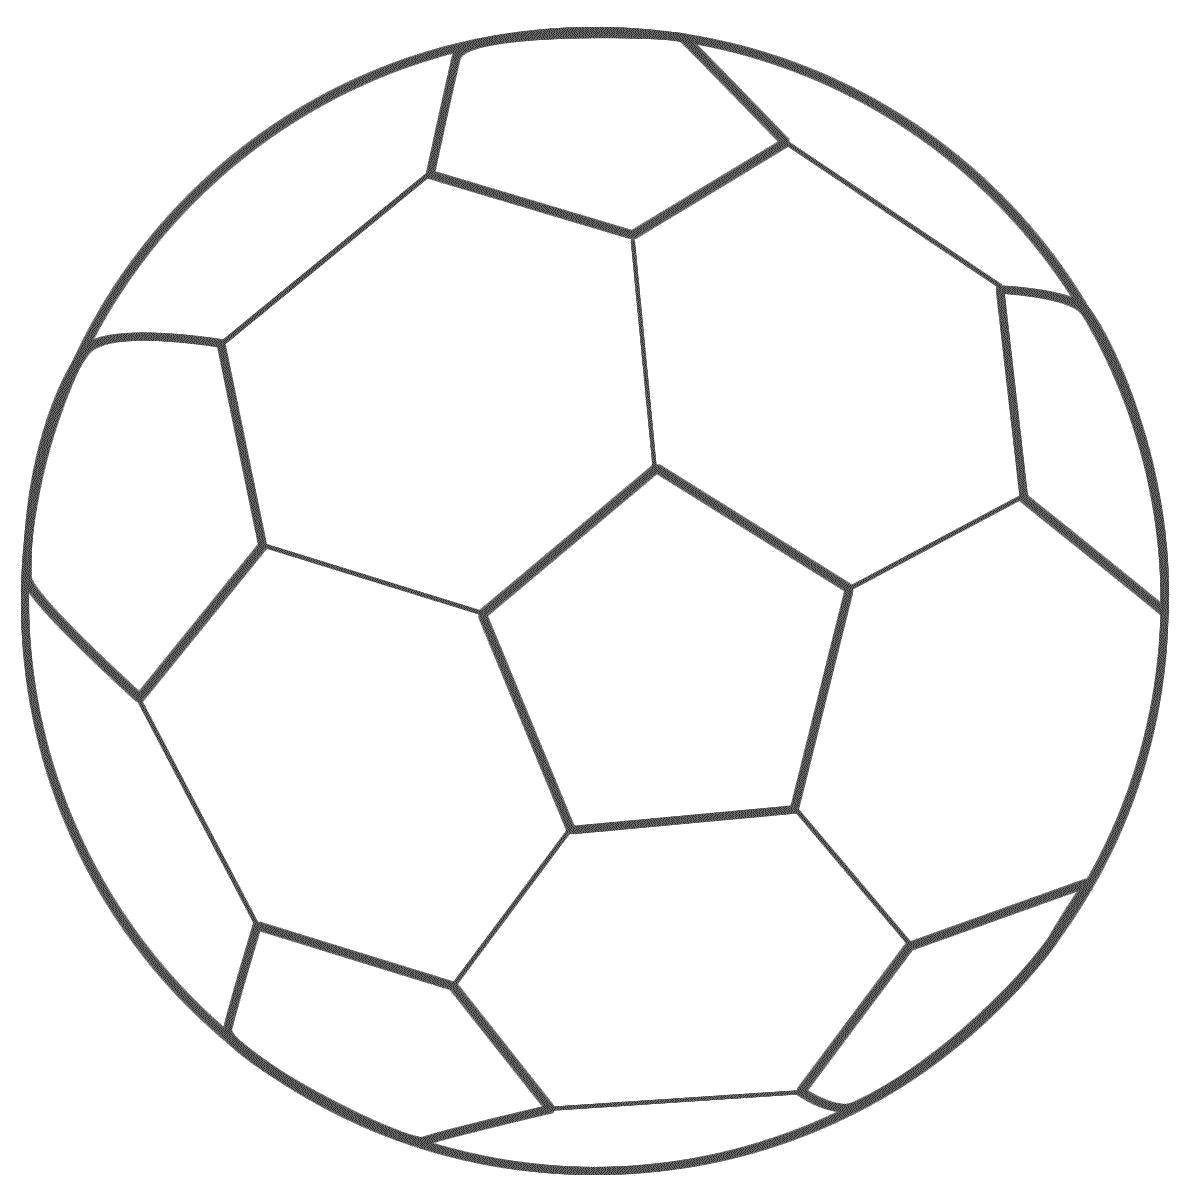 Coloring Soccer ball. Category sports. Tags:  Sports, soccer, ball, game.